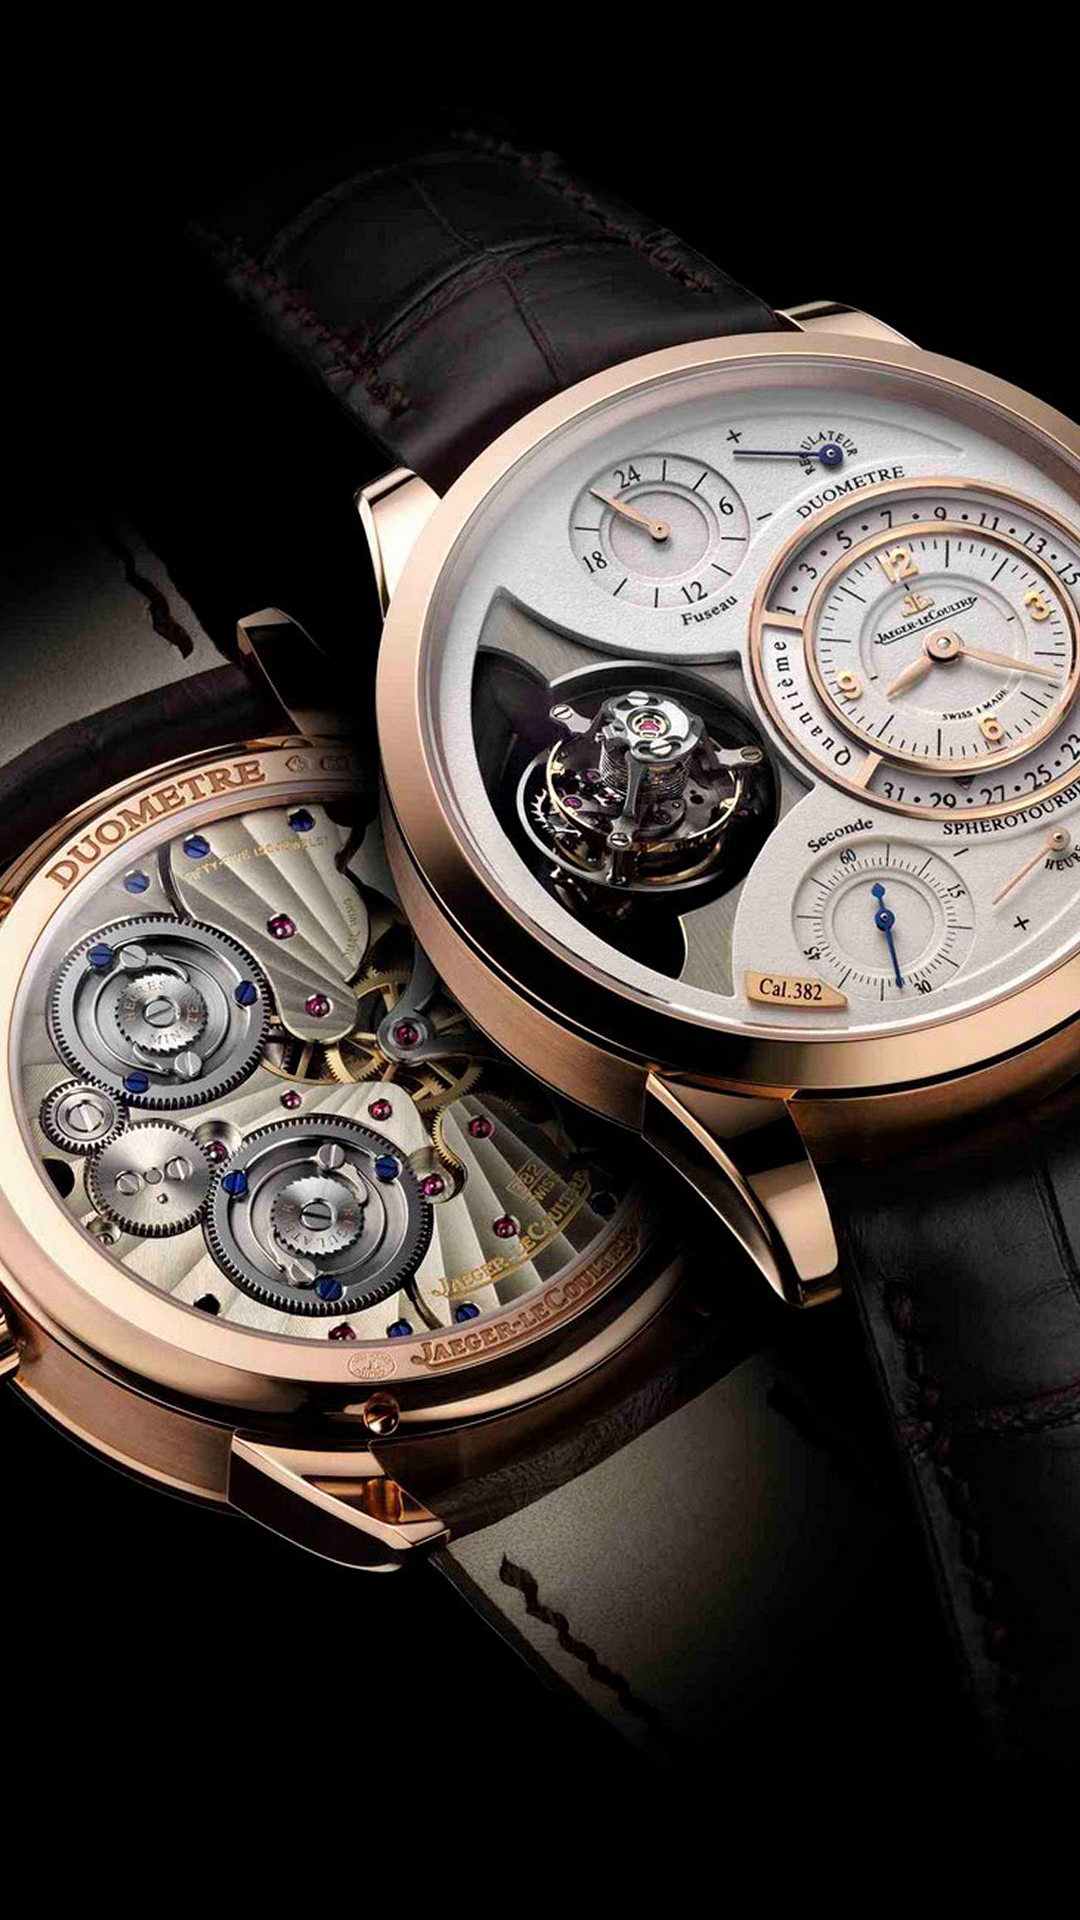 Jaeger-lecoultre Luxury Watch, Wallpapers For Samsung - Jaeger Lecoultre Spherotourbillon , HD Wallpaper & Backgrounds